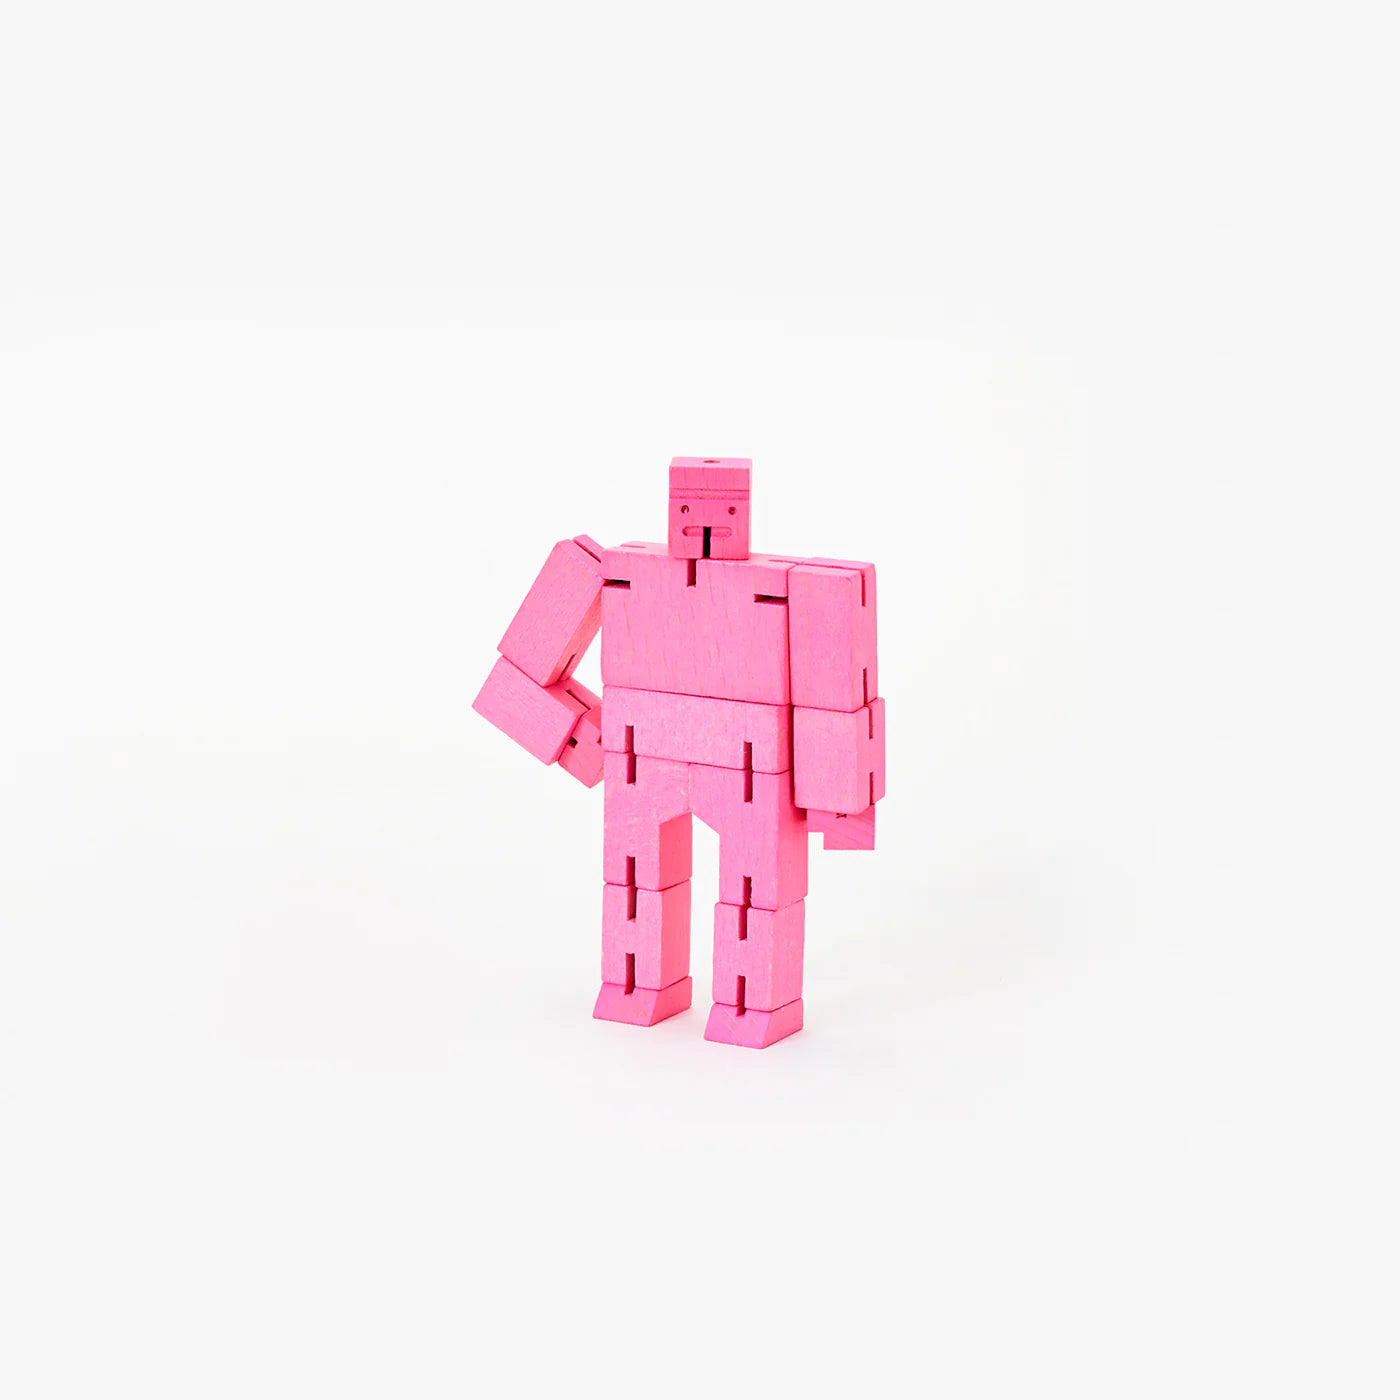 Areaware Cubebot Micro 1.5 x 1.5 inch cube